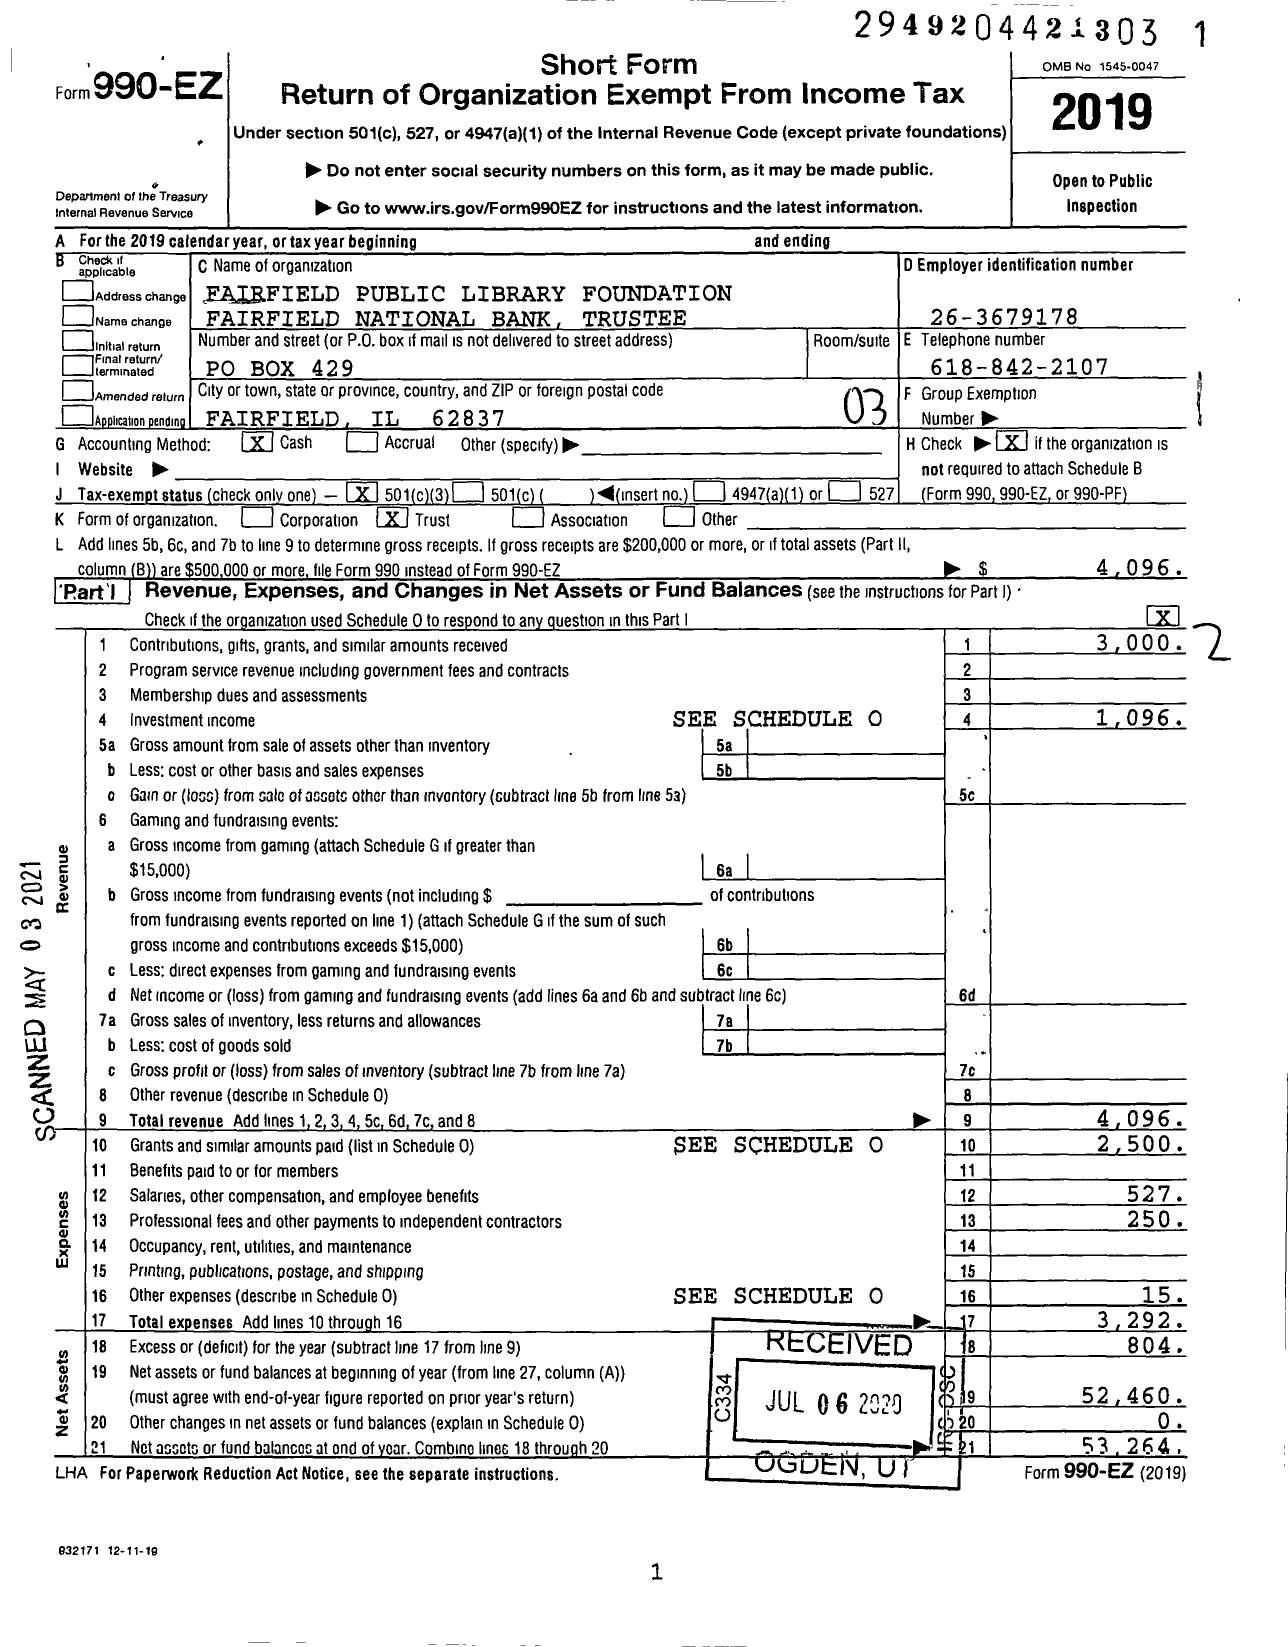 Image of first page of 2019 Form 990EZ for Fairfield Public Library Foundation Fairfield National Bank Trustee